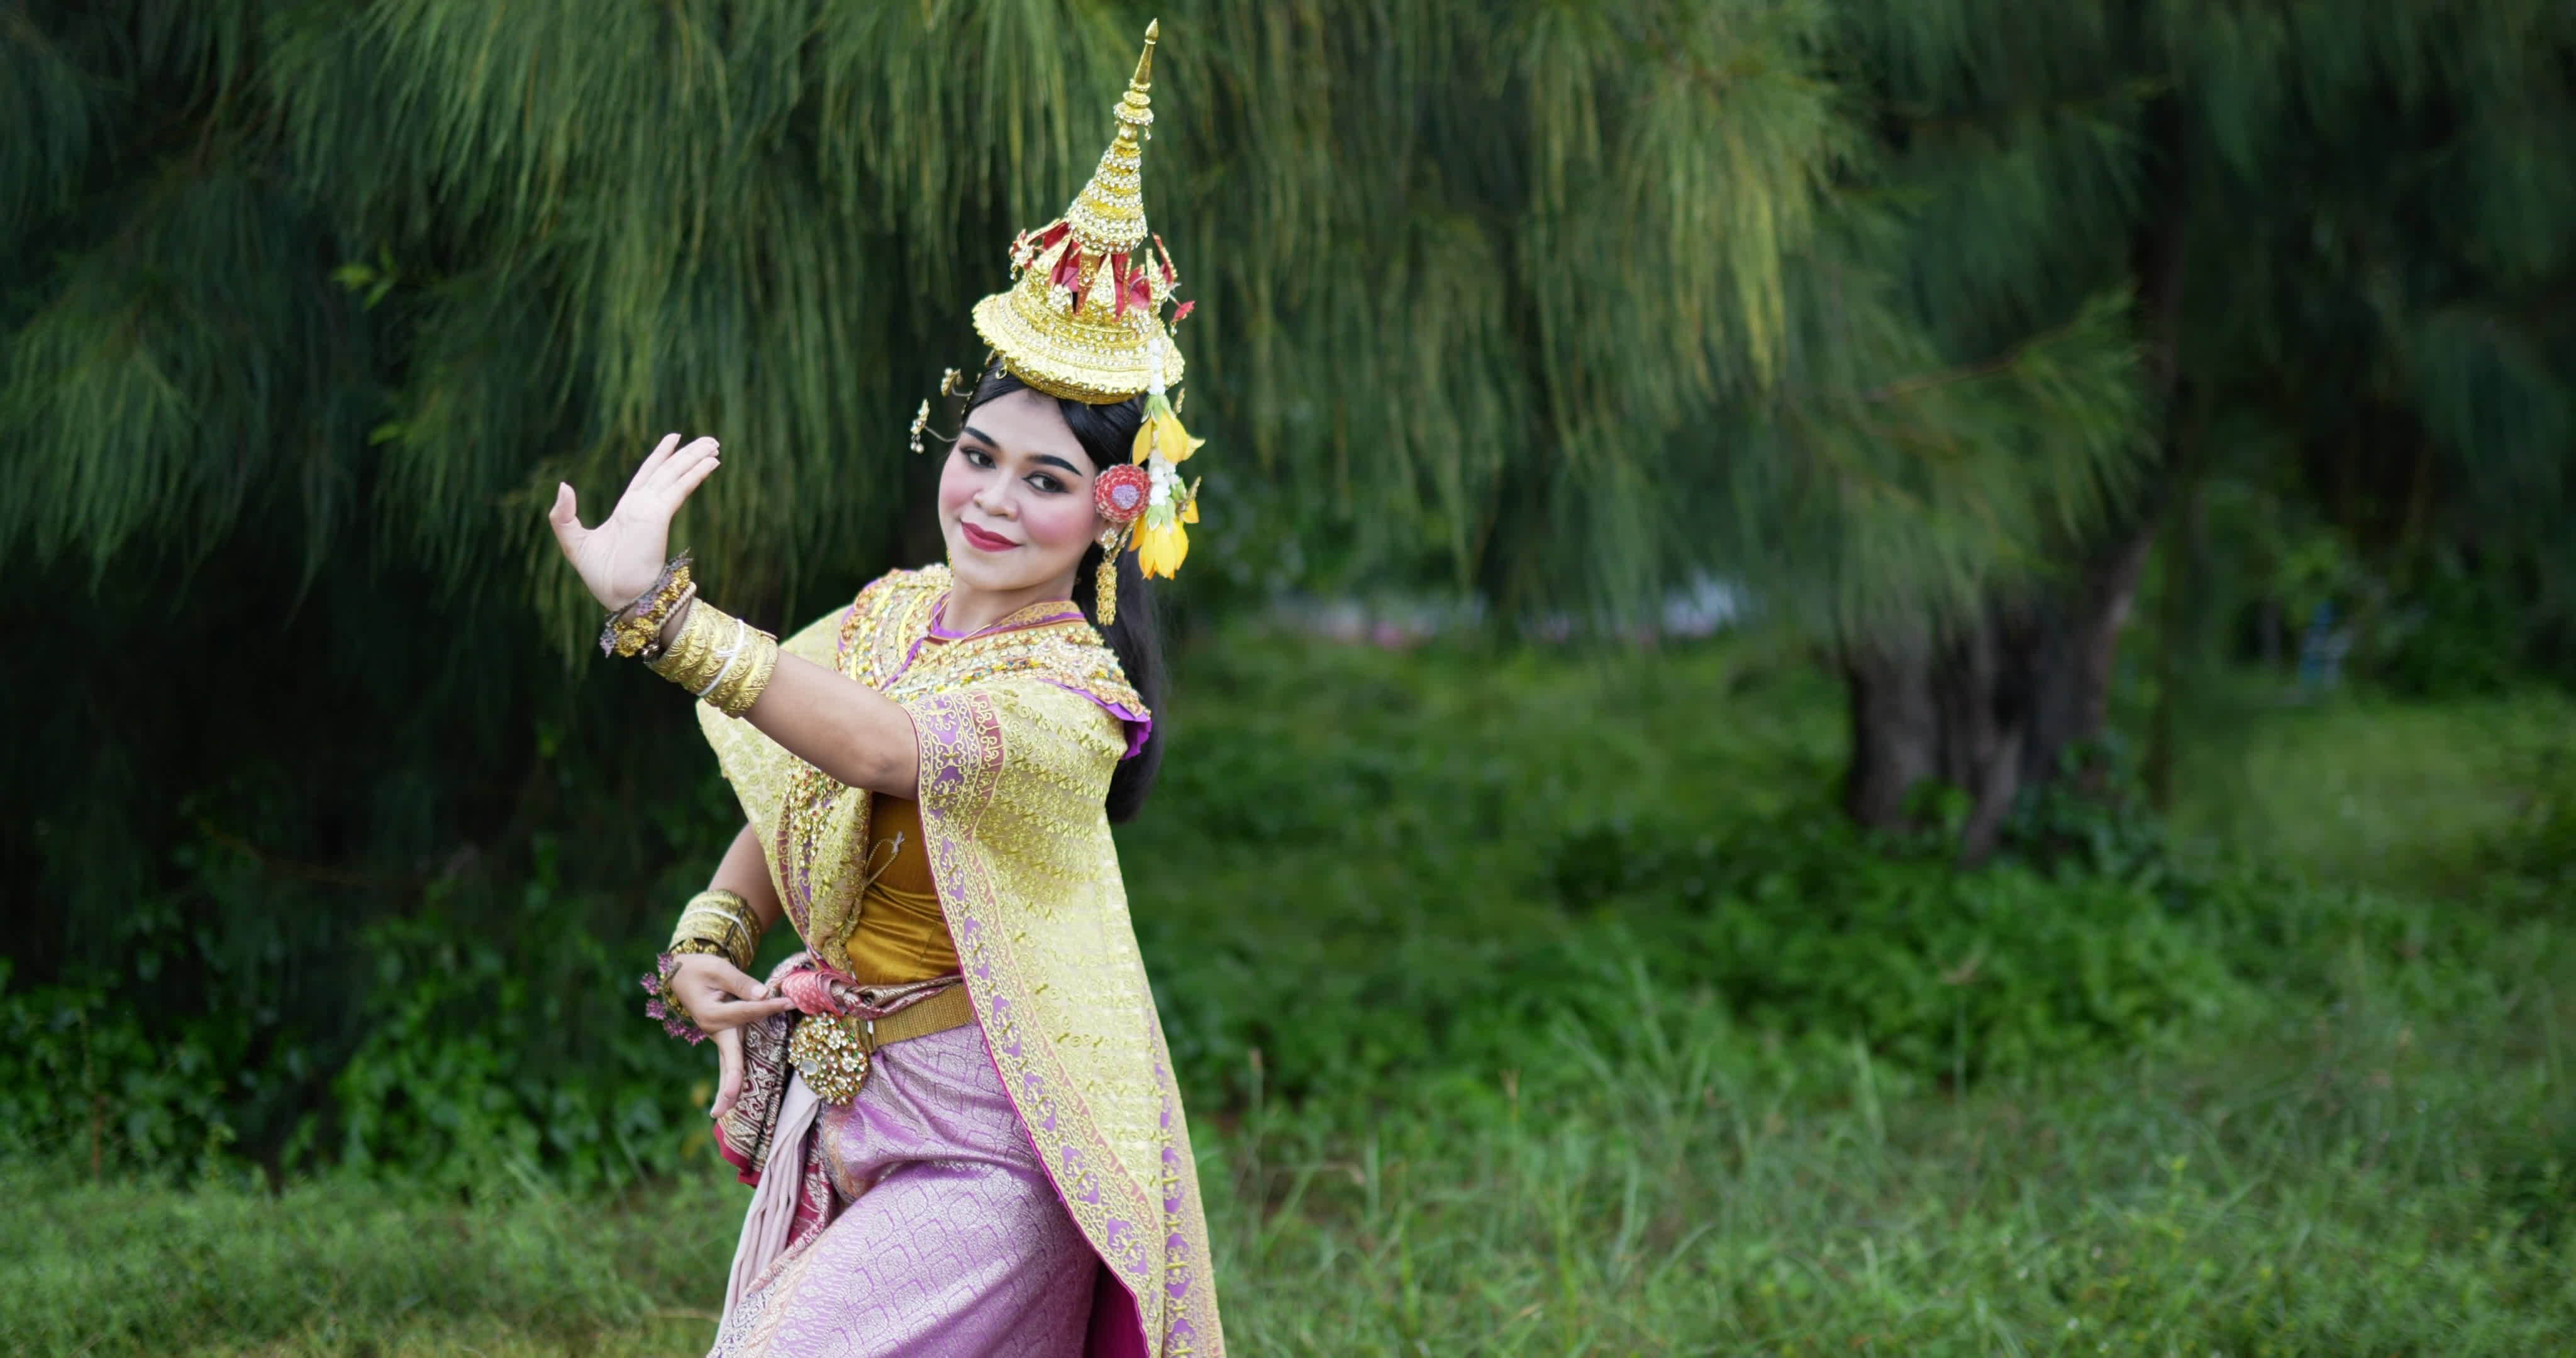 Khon performance arts acting entertainment dance traditional costume in ... Traditional Thai Dancing